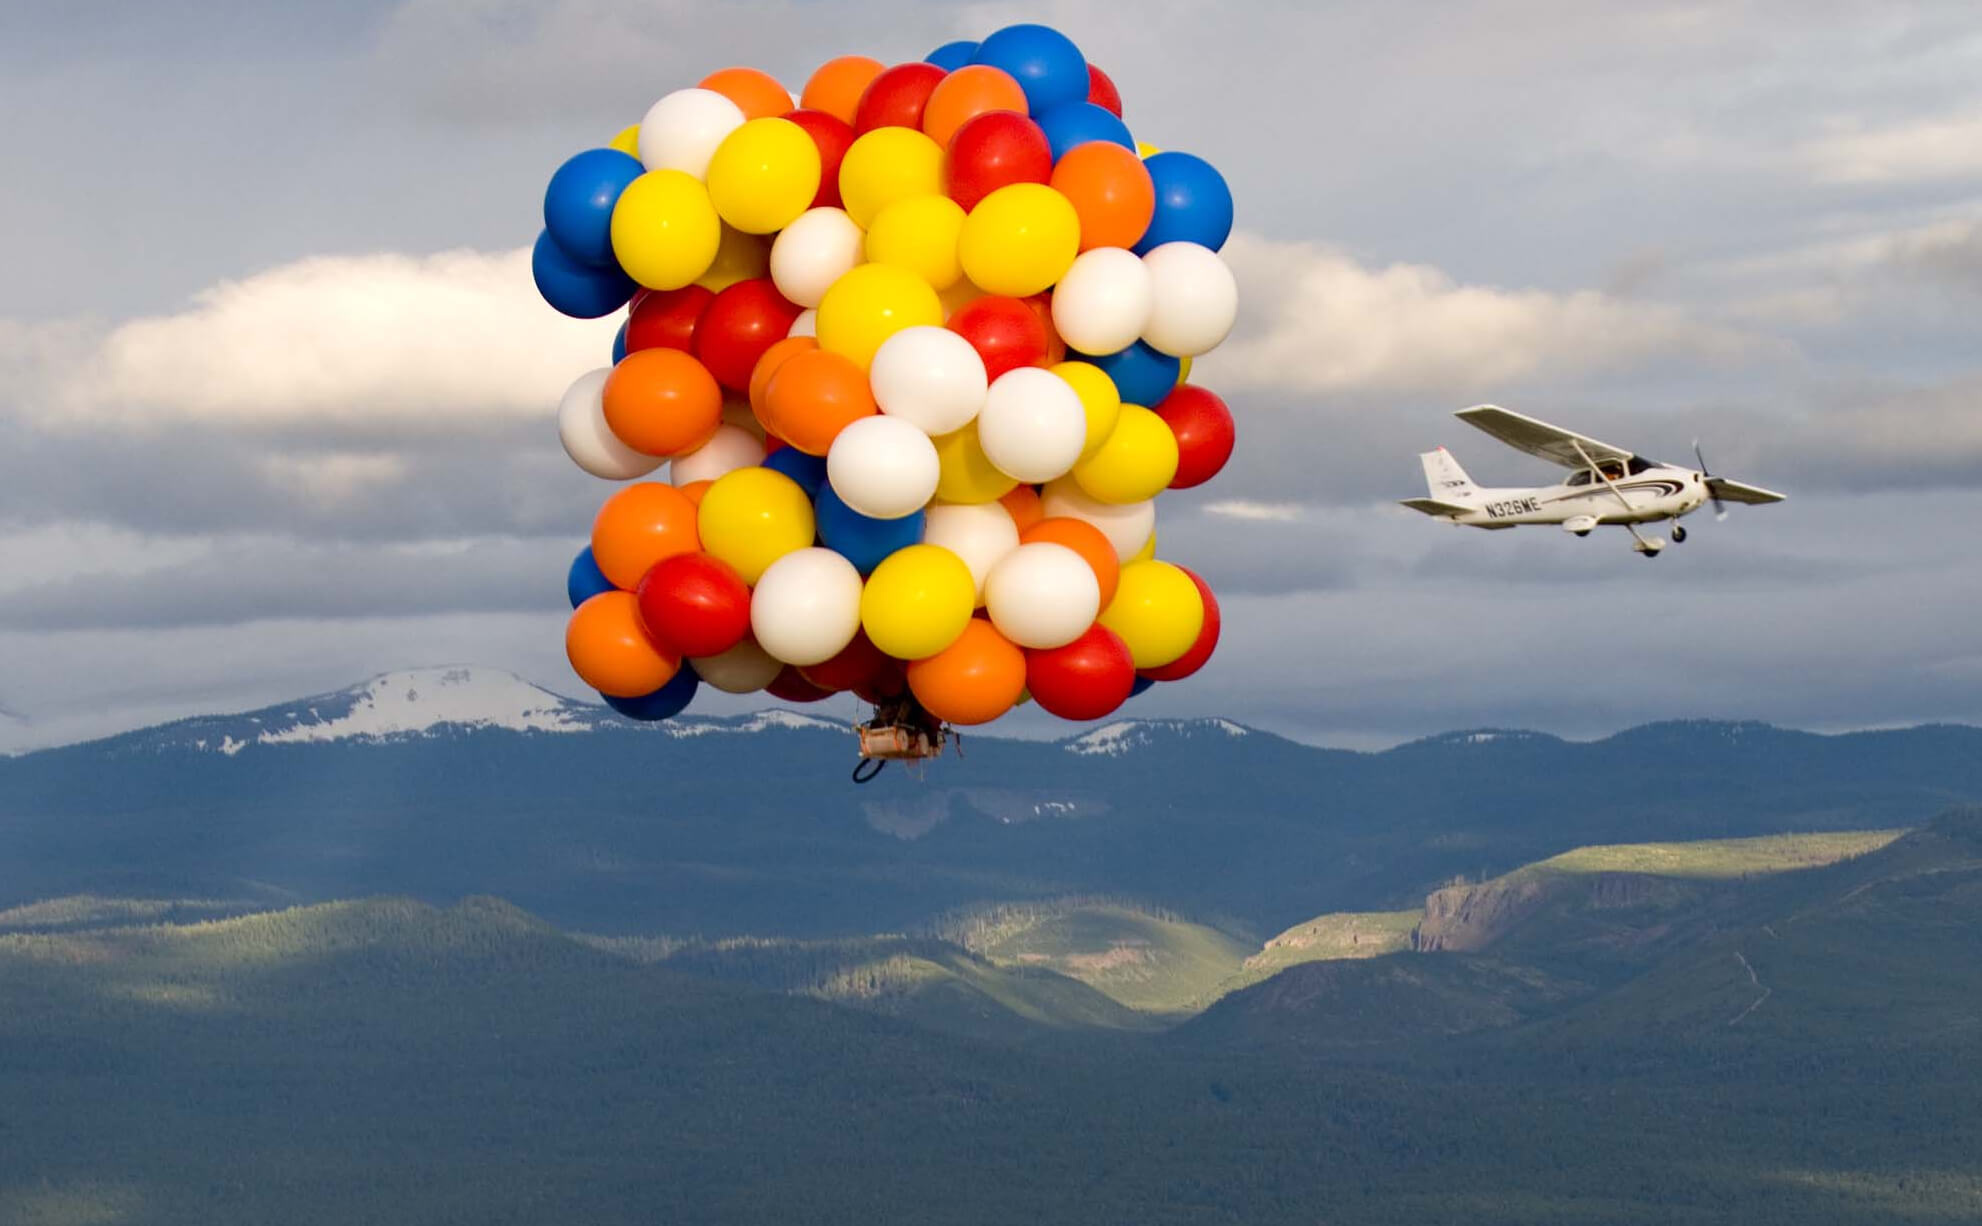 Cluster Ballooning: Kent Couch Cluster Balloon Flight, Flight across the state of Oregon. 1990x1230 HD Wallpaper.